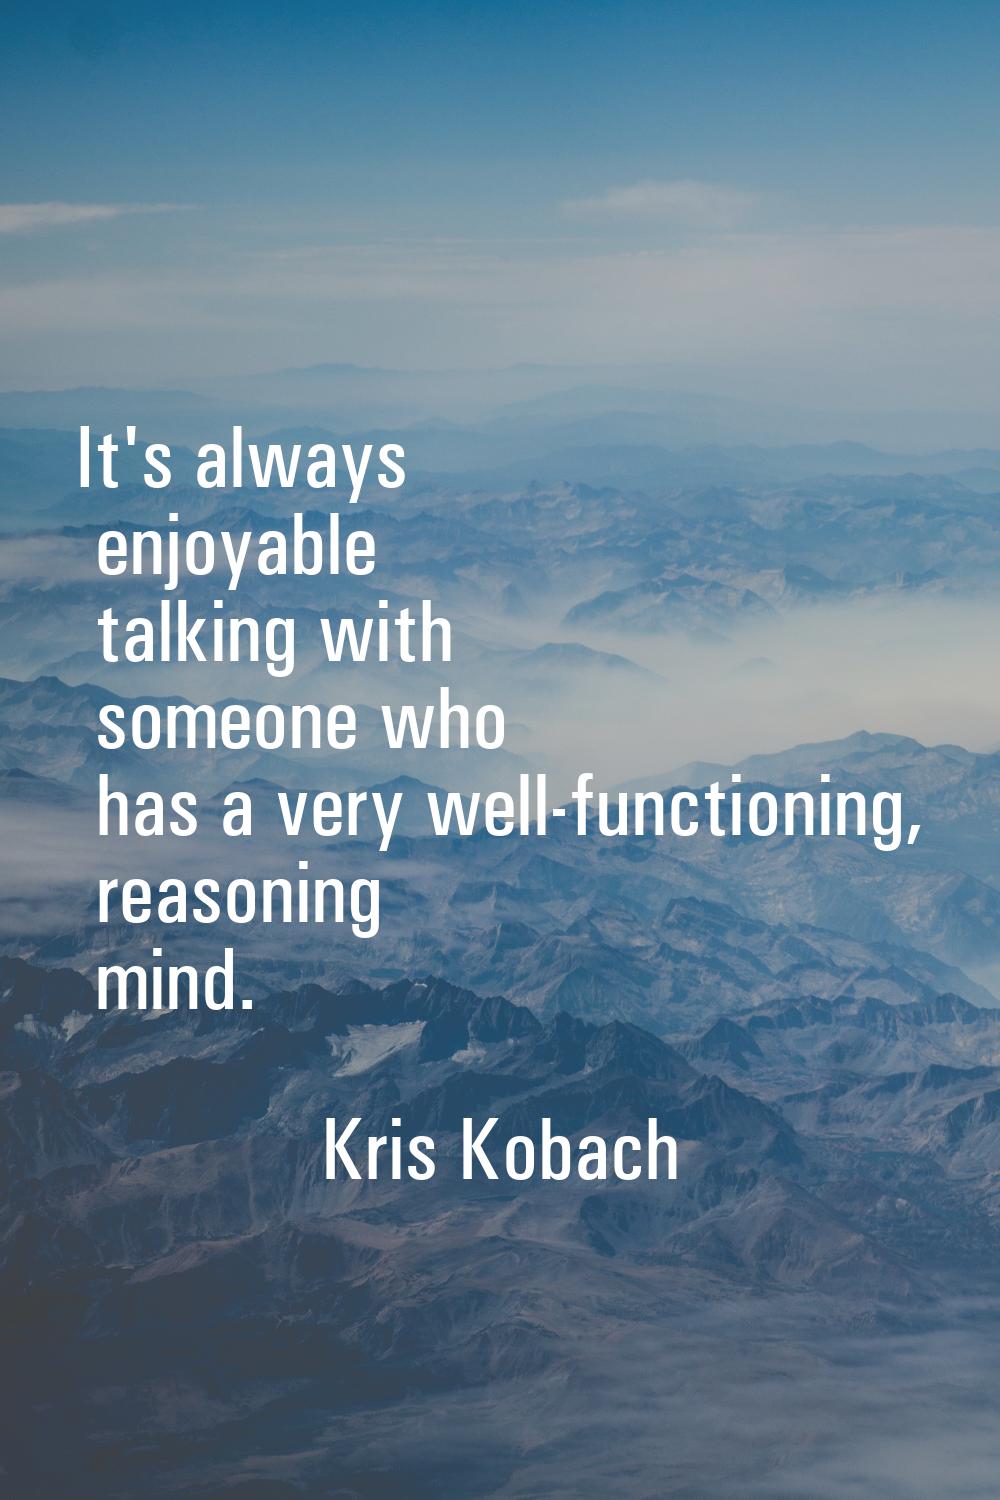 It's always enjoyable talking with someone who has a very well-functioning, reasoning mind.